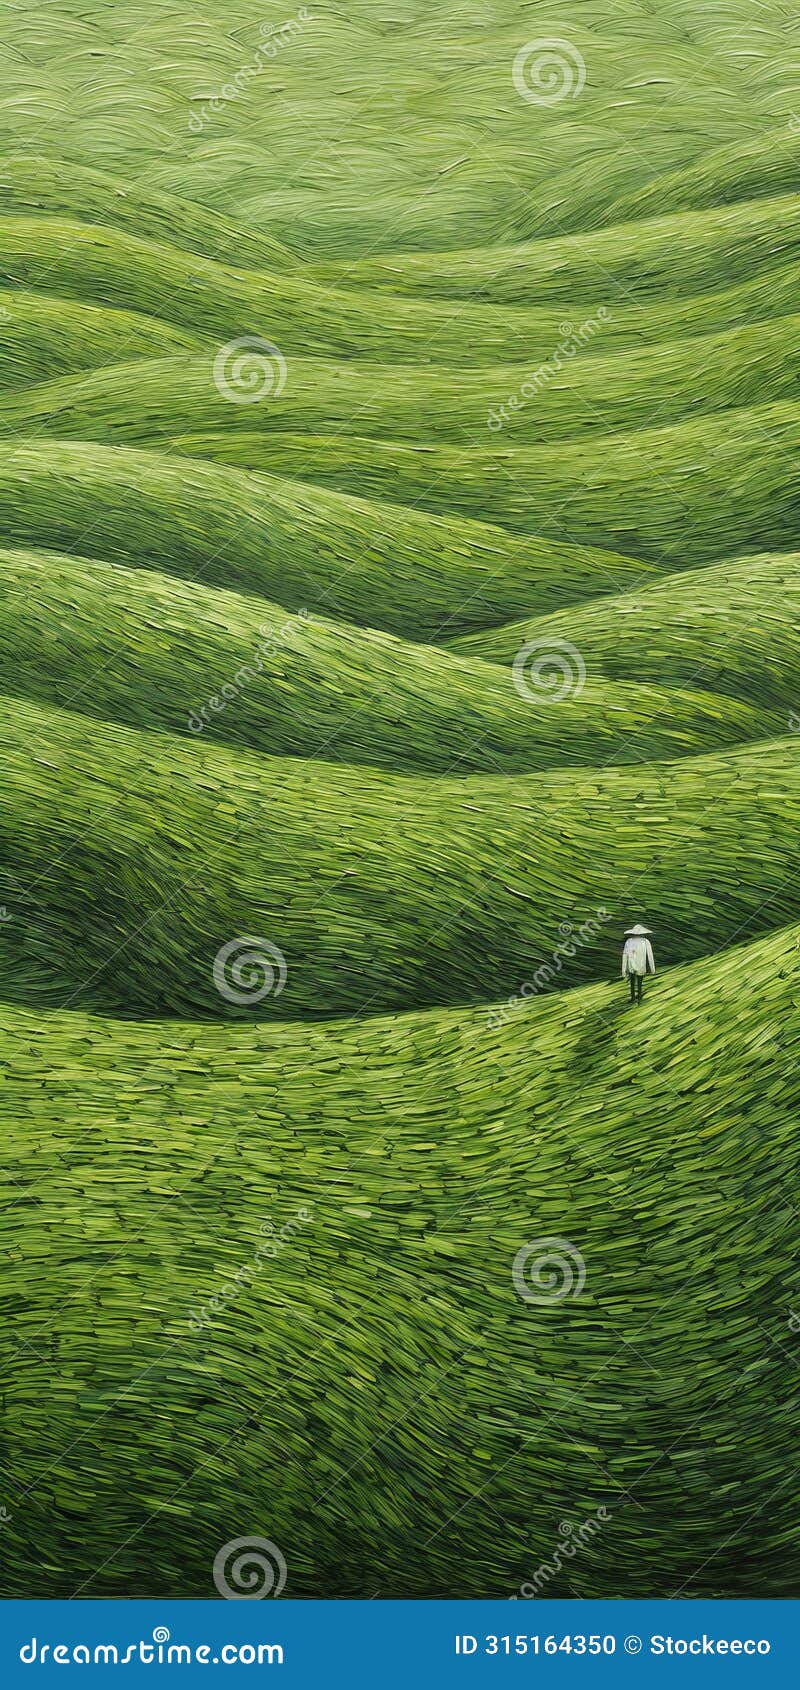 endless lawn: a rustic figurative painting of a green field with a small house